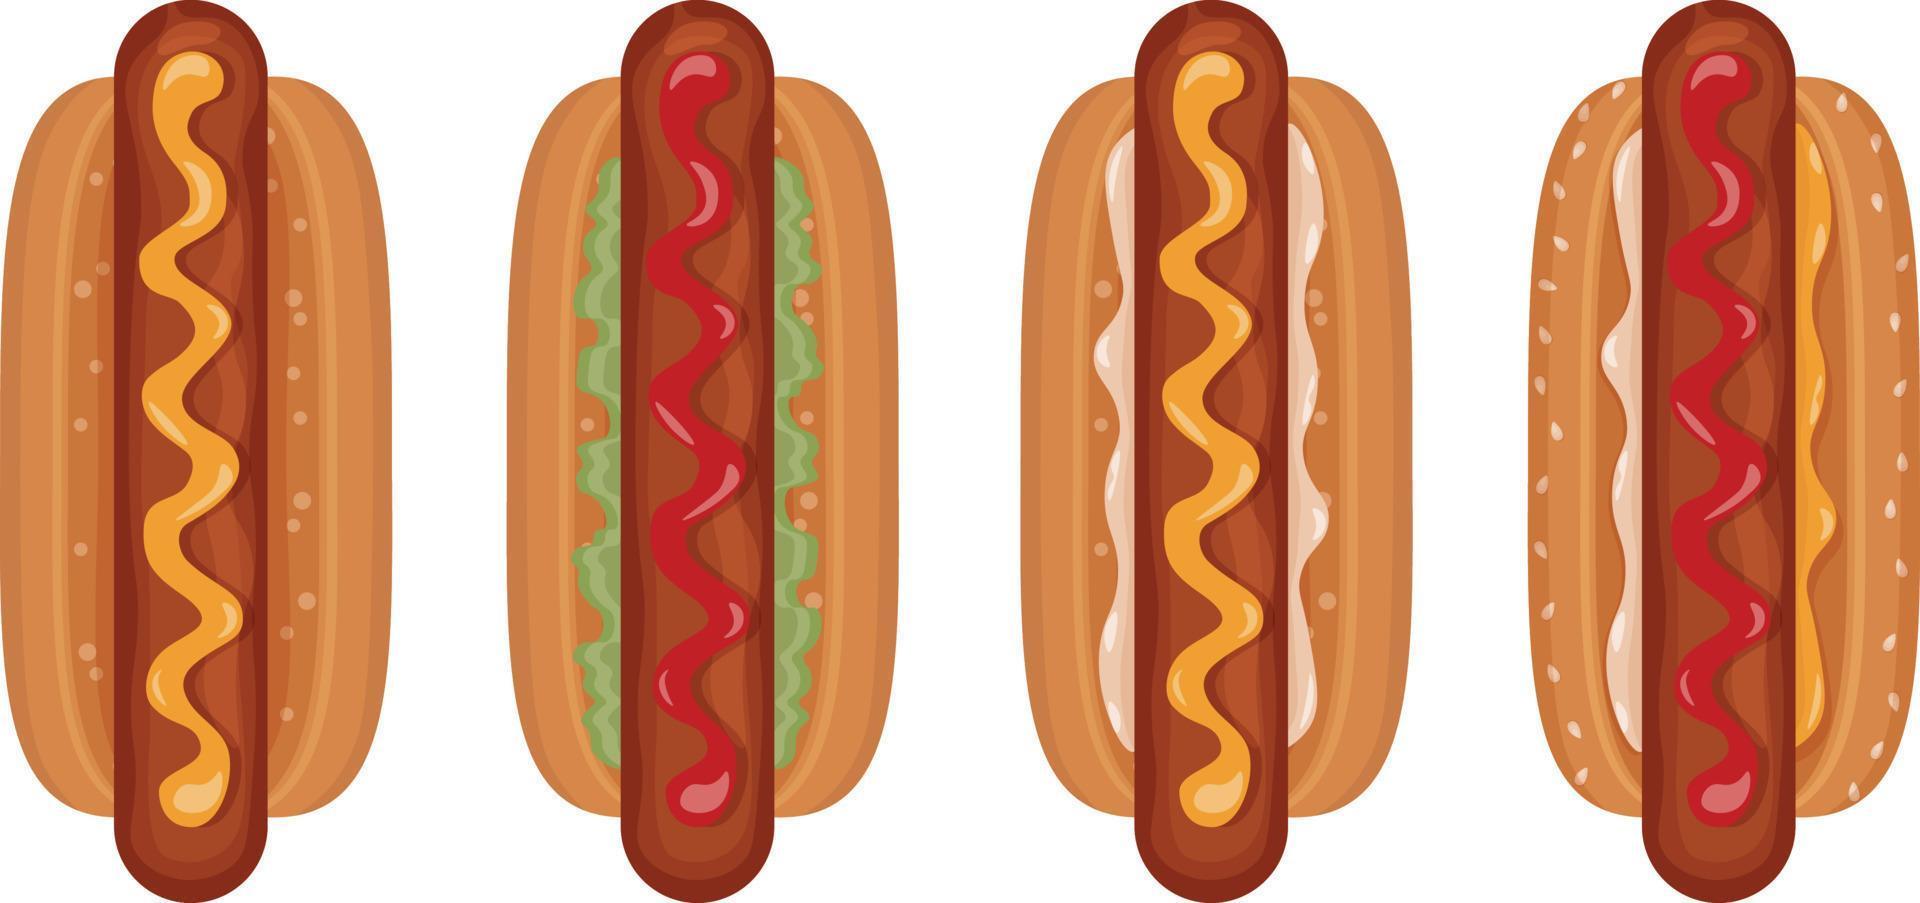 An appetizing set of four hot dogs top view Delicious juicy hot dogs with sausage, ketchup, mayonnaise, mustard and lettuce leaves. Fast food in cartoon style. Vector illustration on white background